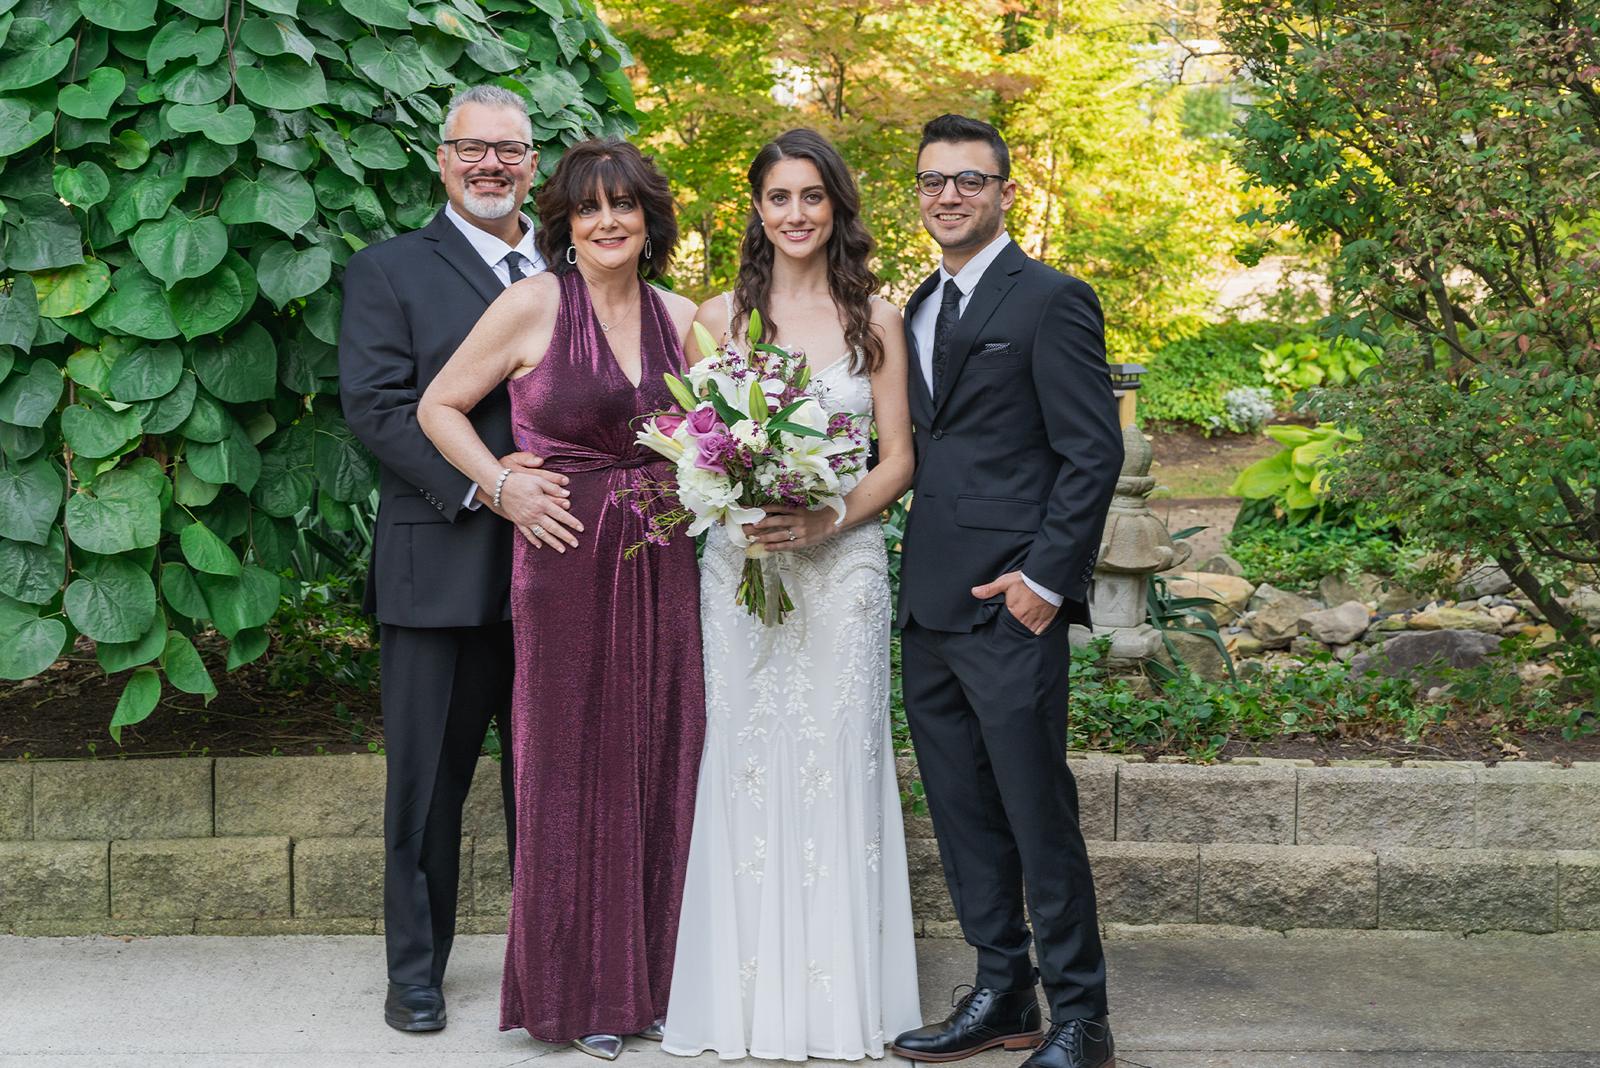 Bride with family, family portrait, classy, formal, beautiful bouquet of flowers, plants, nature, trees, stone, green, classy wedding ceremony at Landerhaven, Mayfield Heights OH